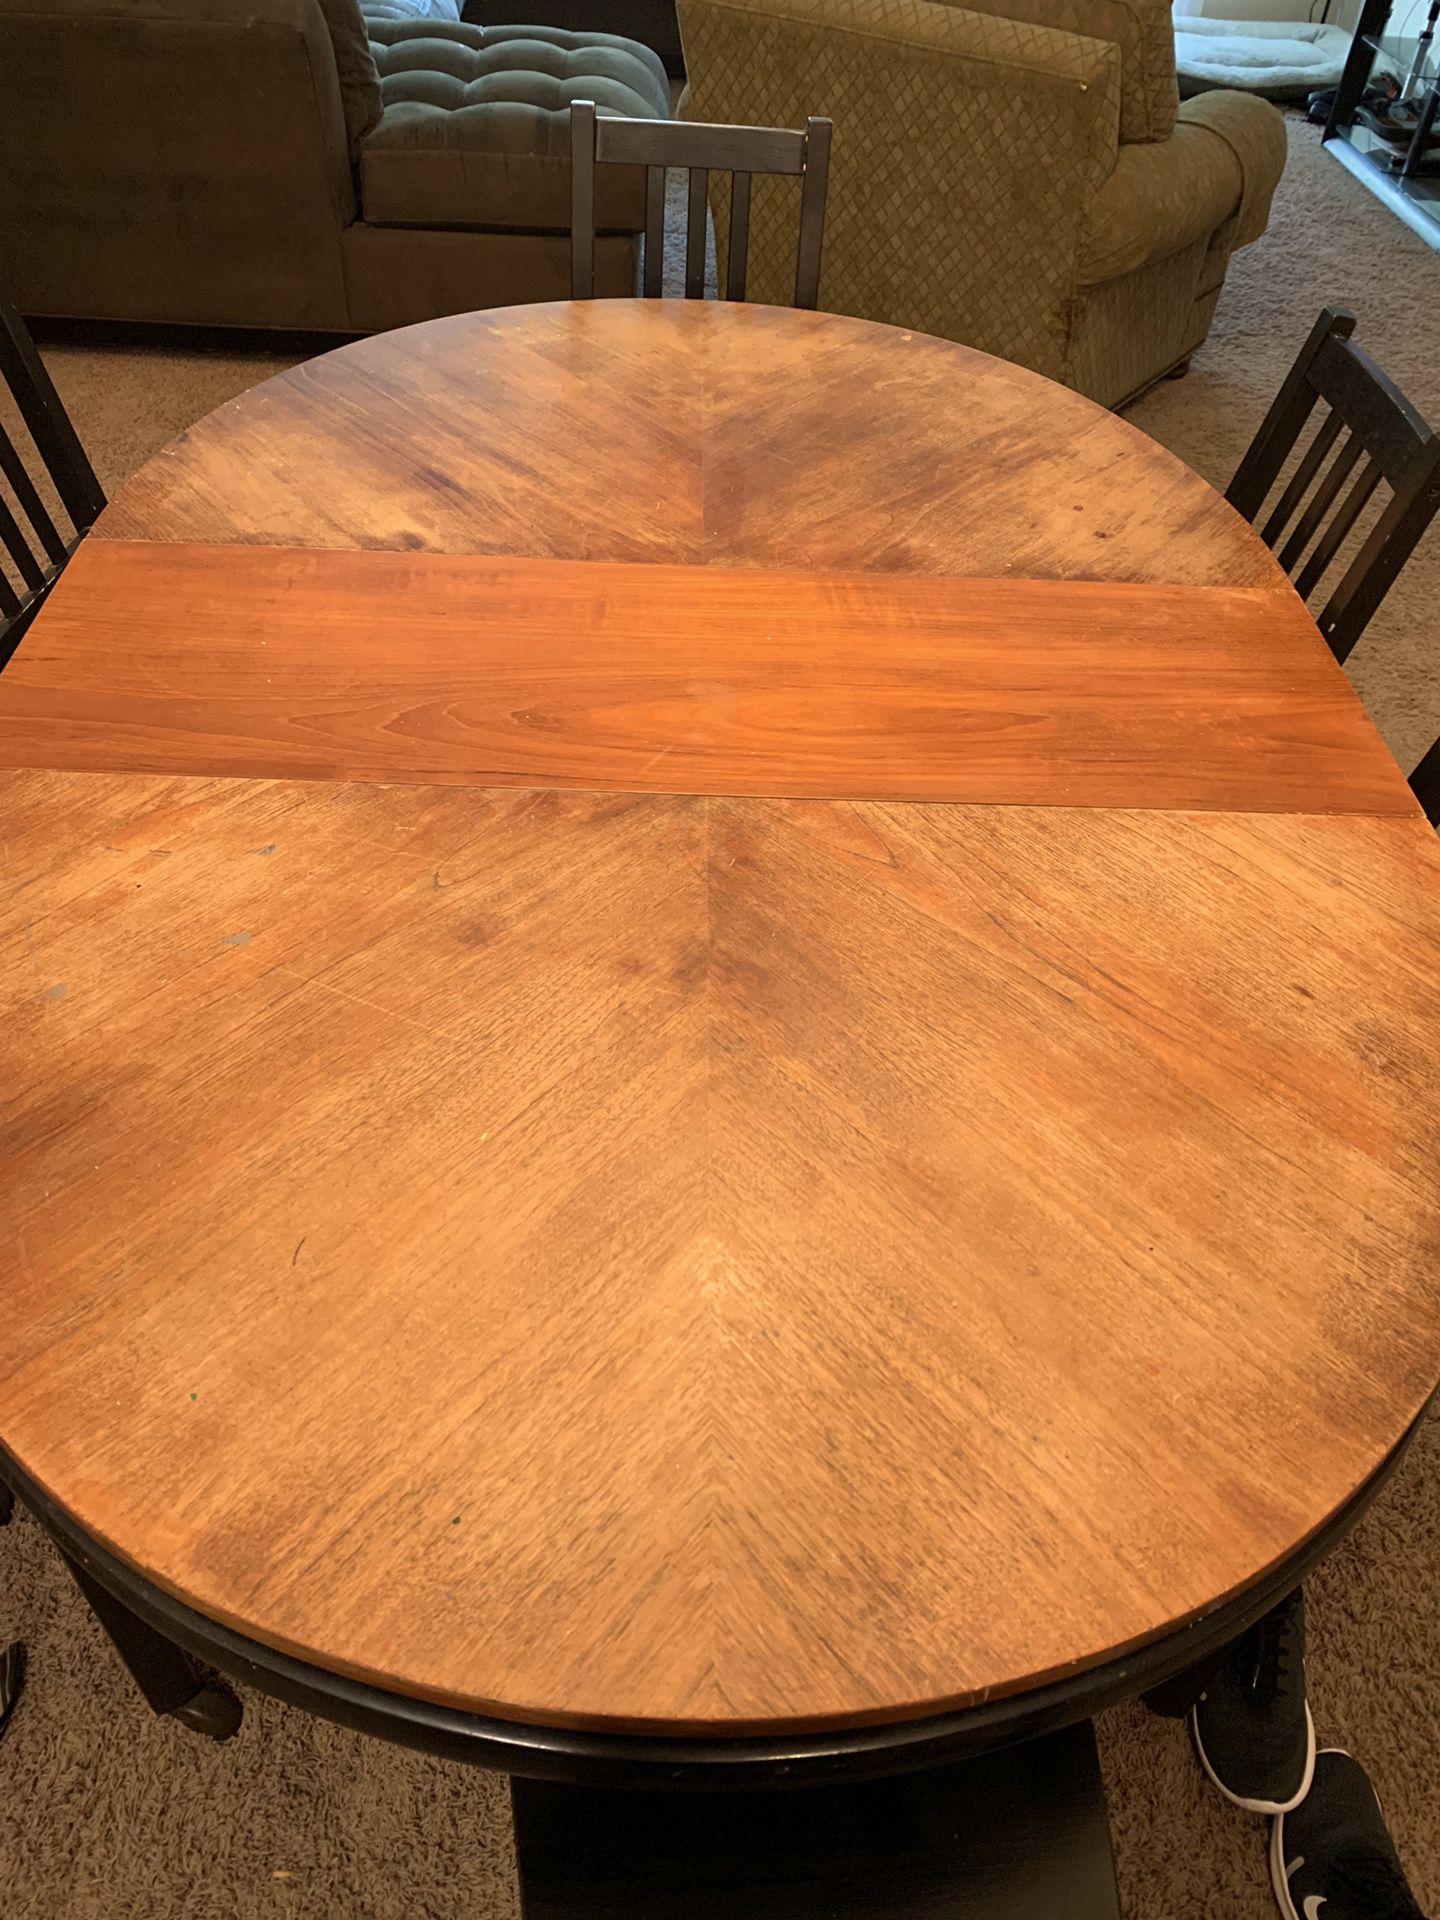 Dining room table with 3 leaves